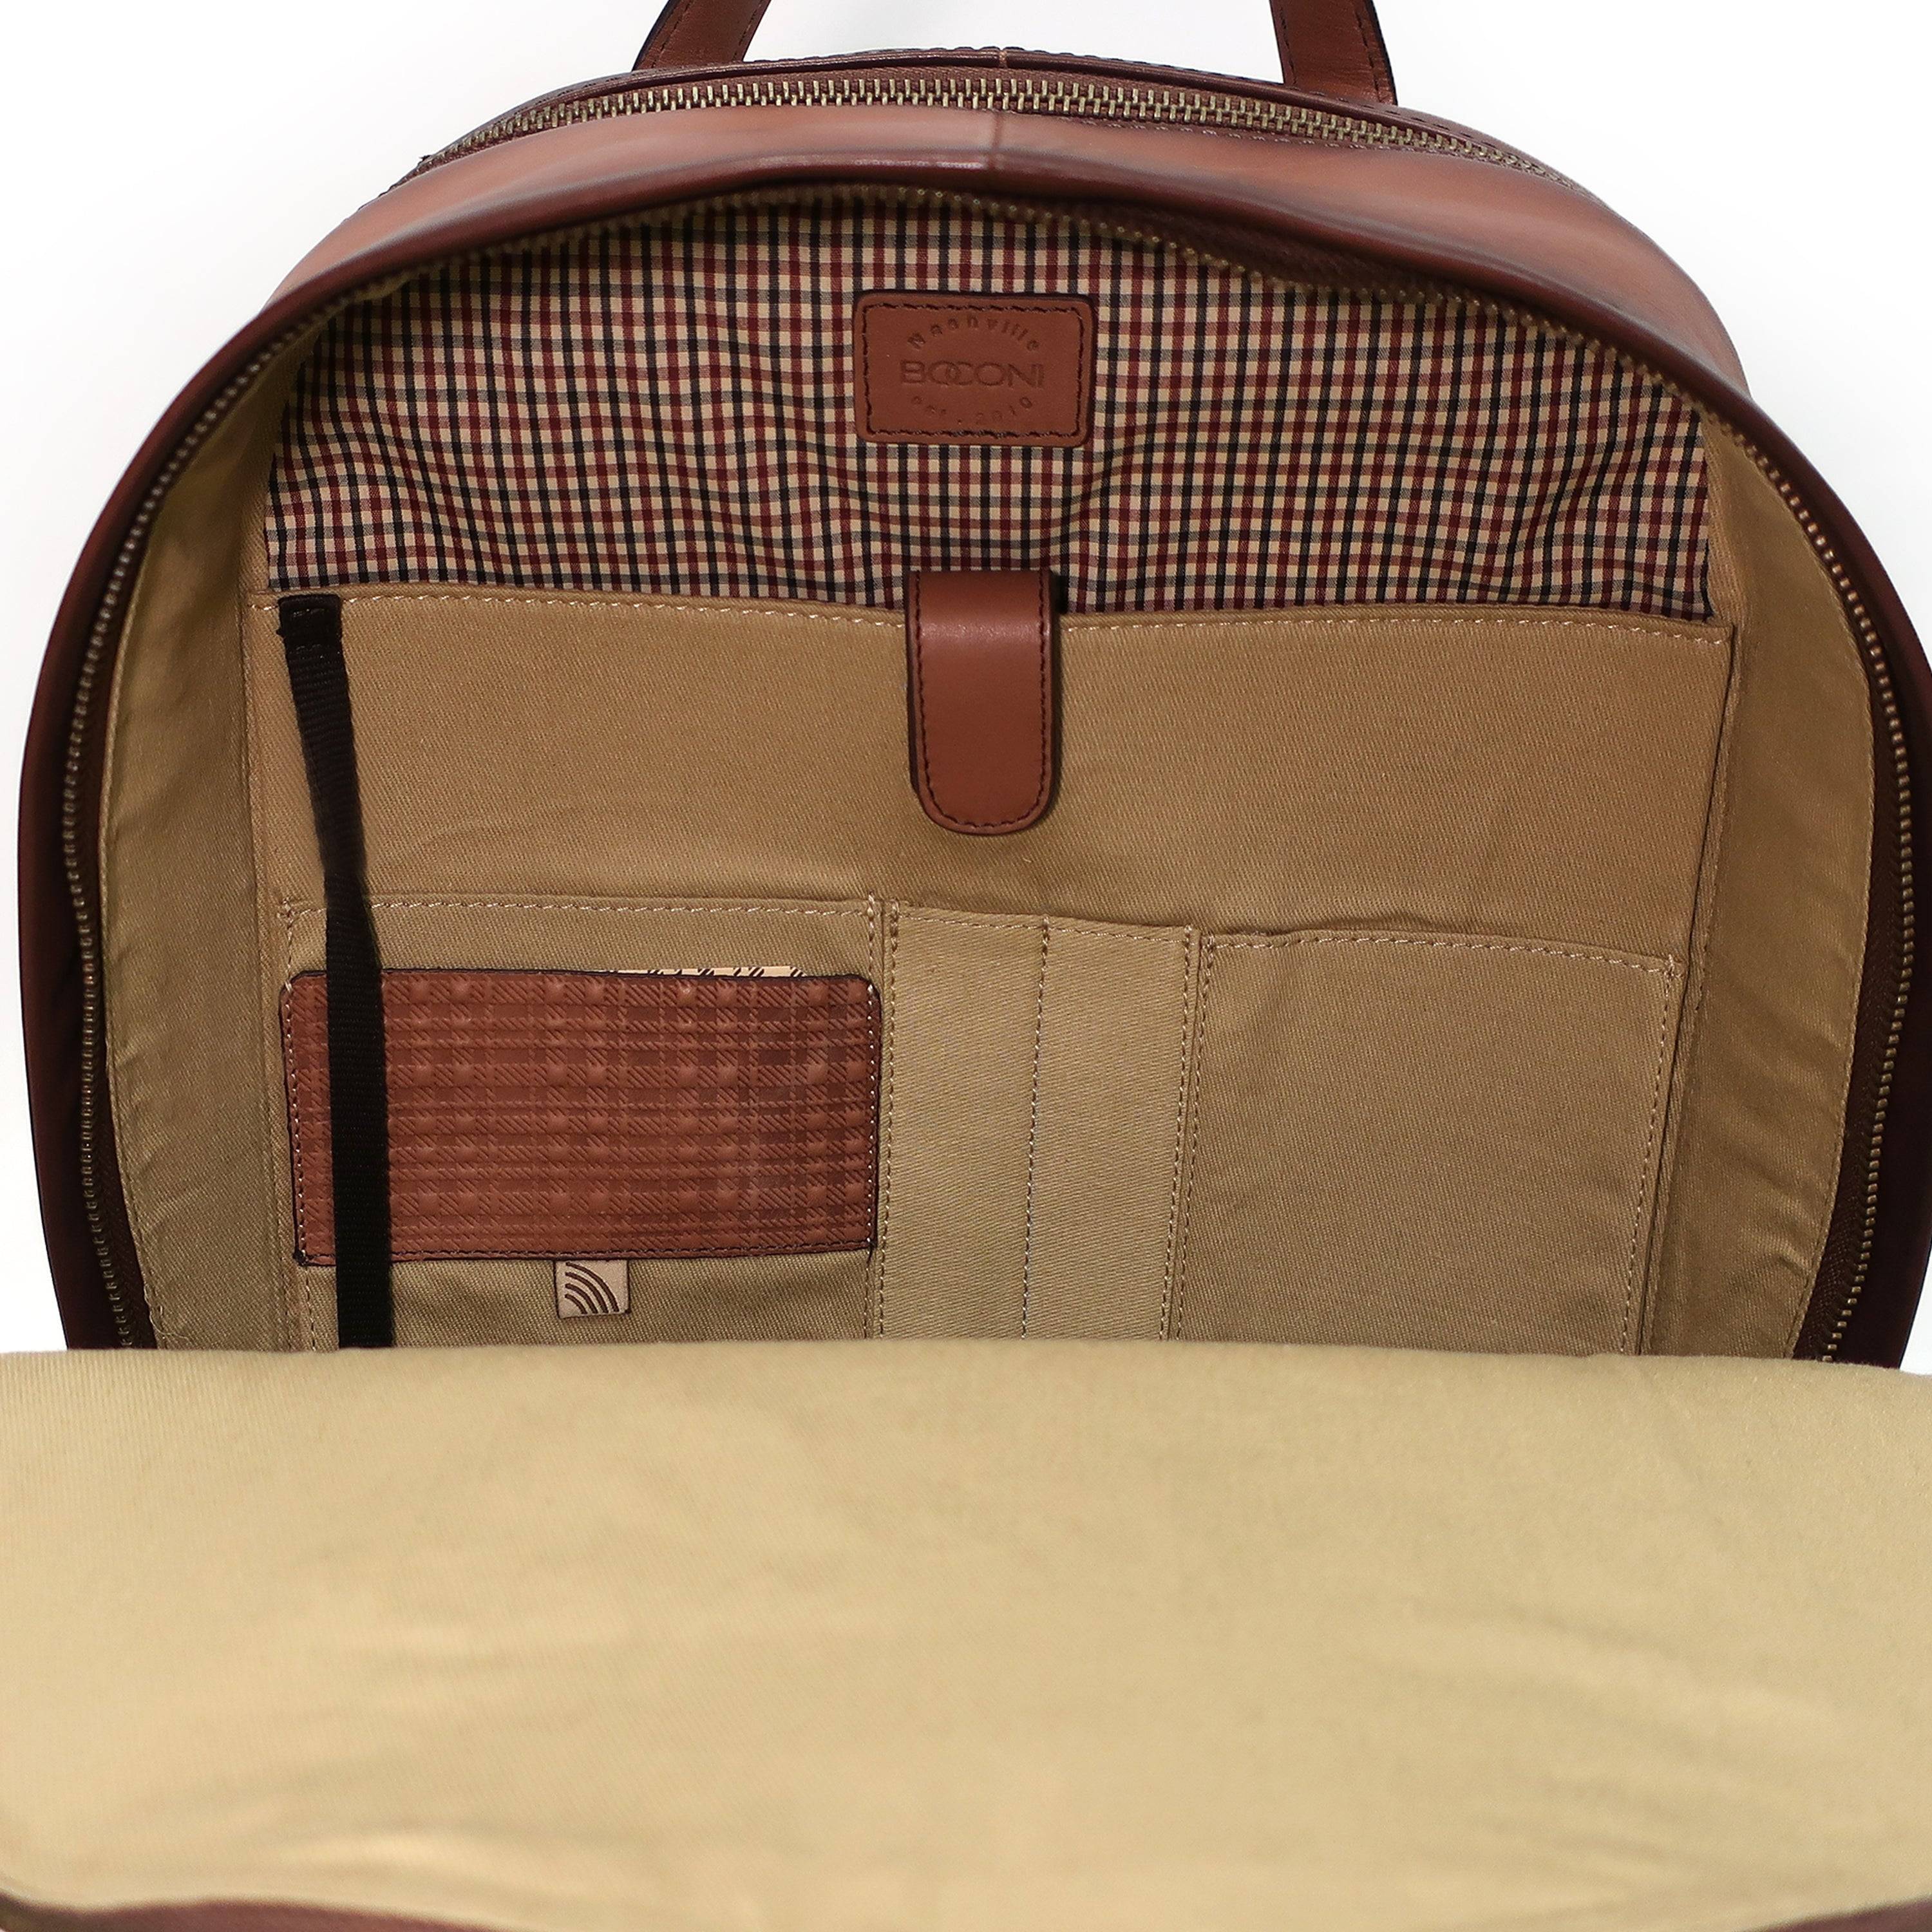 Dawn Burnished Leather Backpack